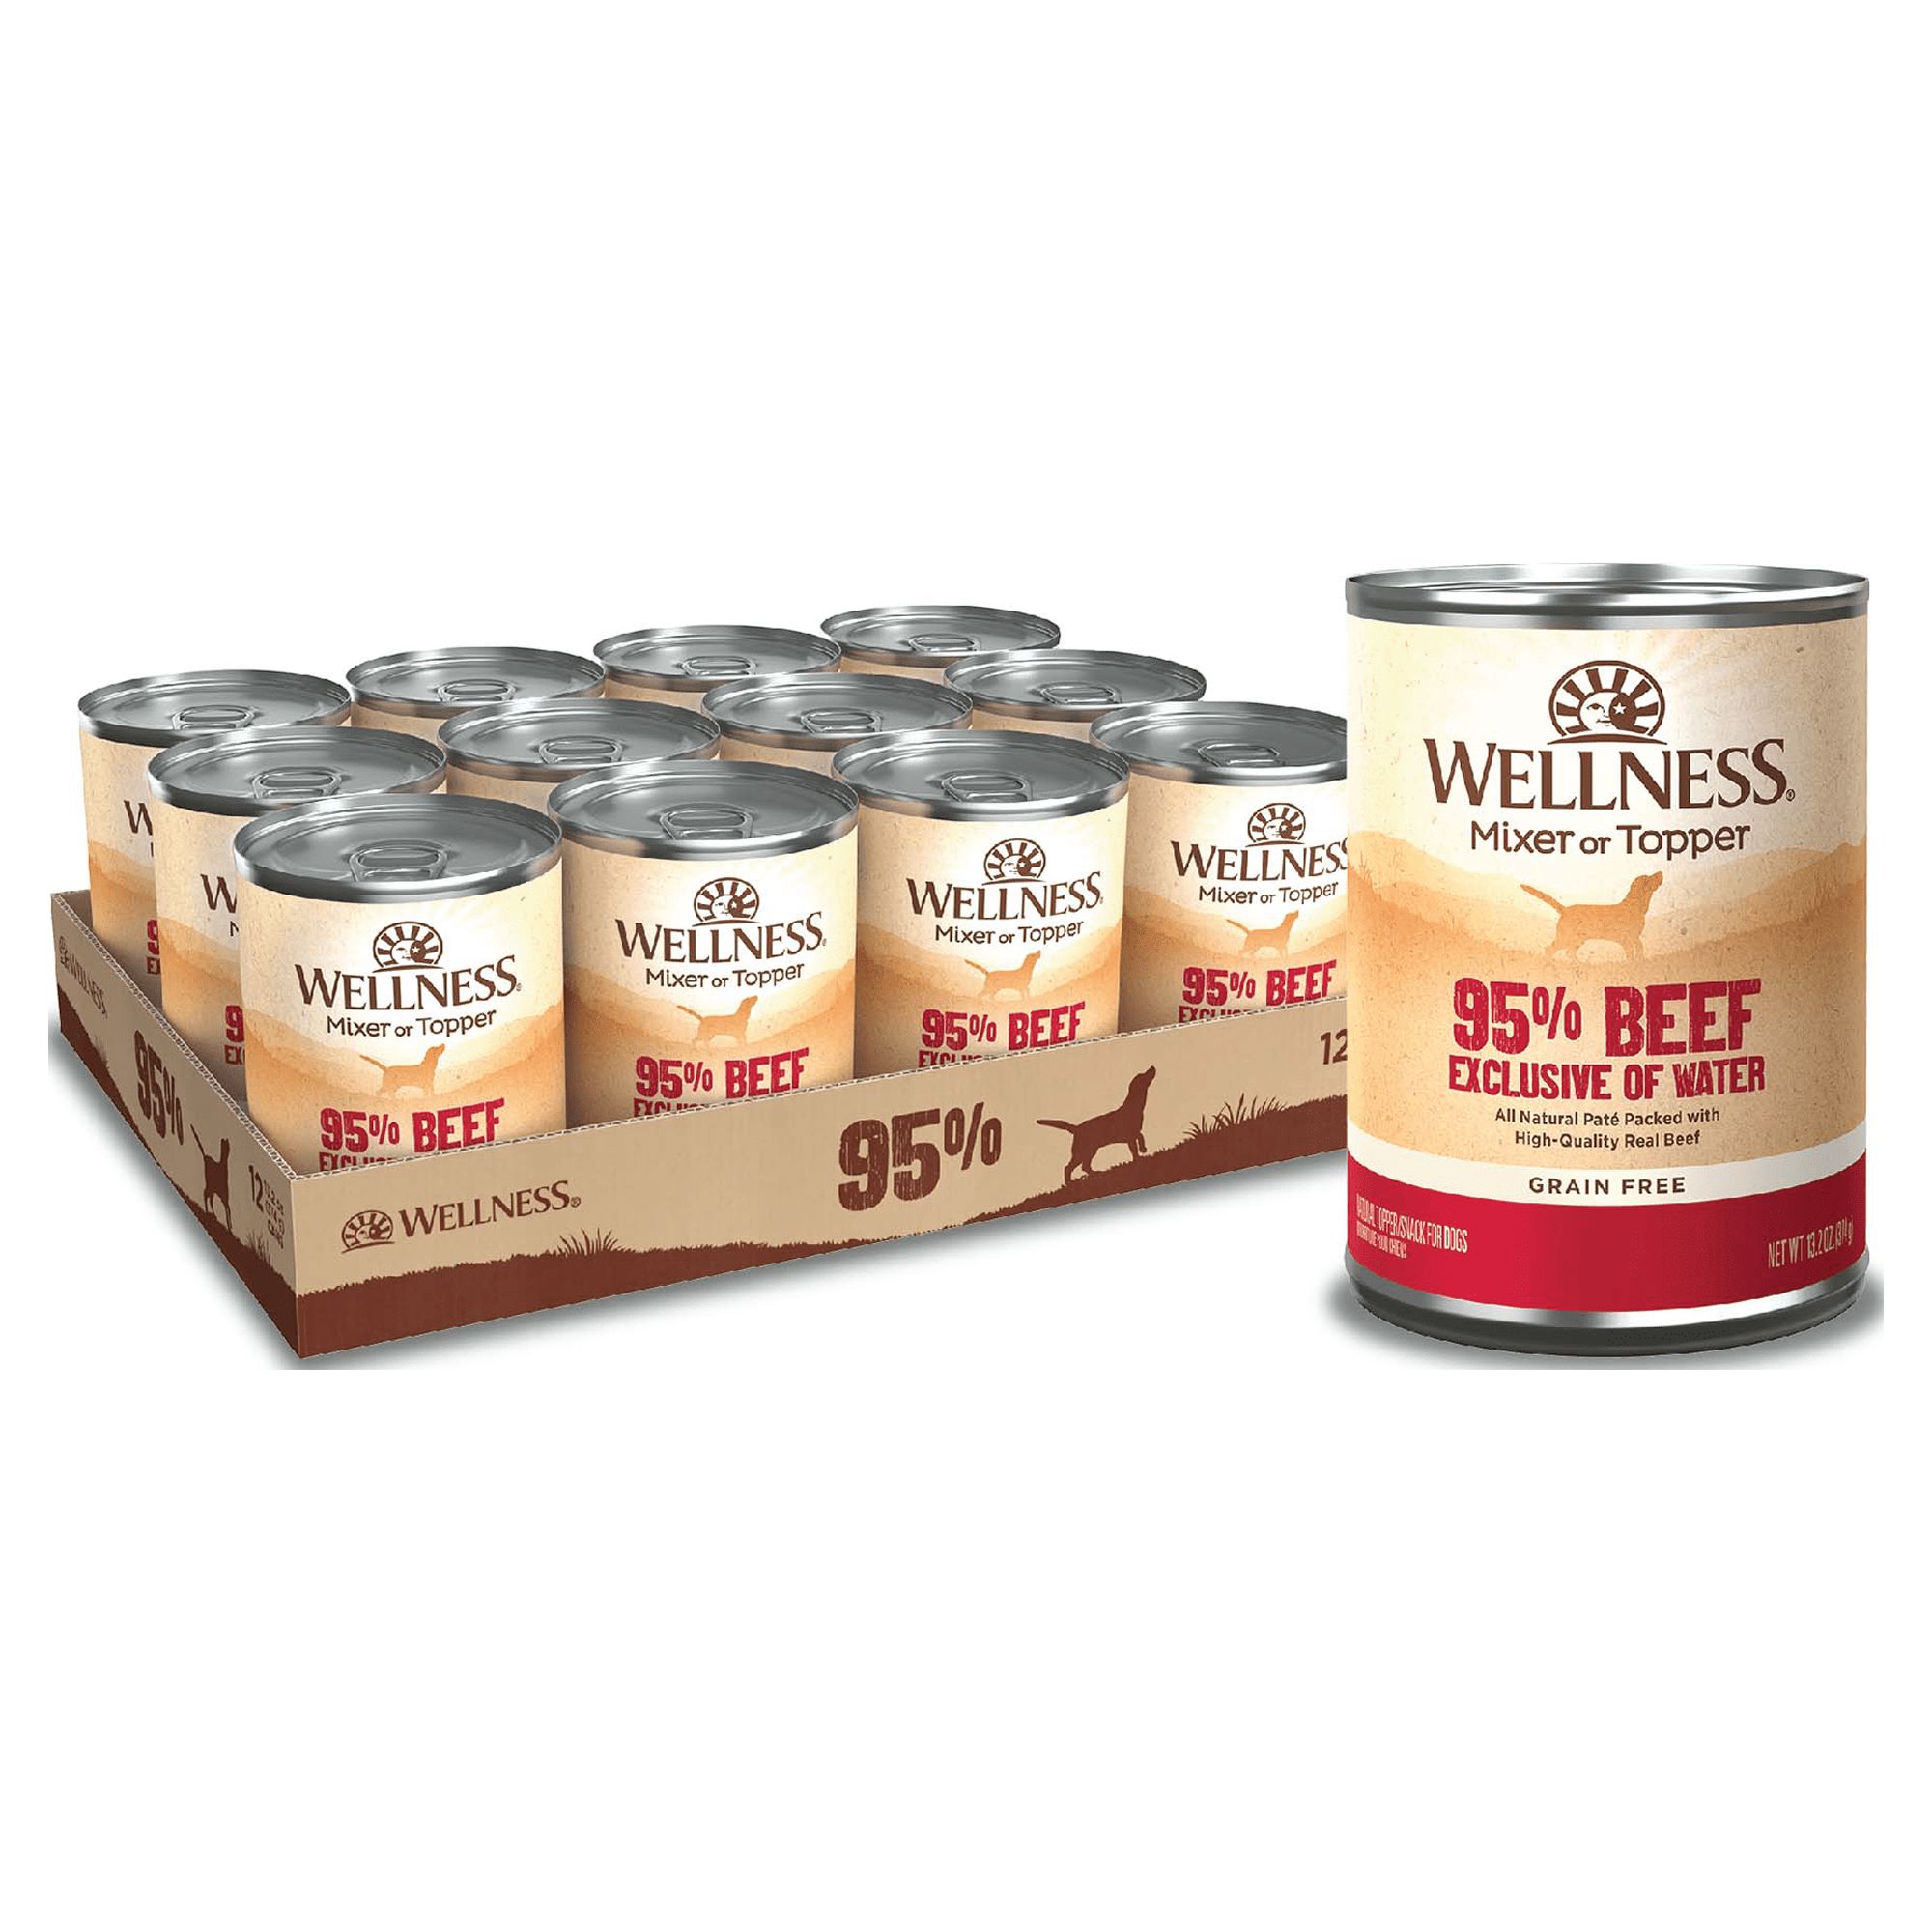 Wellness 95% Beef Natural Wet Grain Free Canned Dog Food, 13.2-Ounce Can (Pack of 12) - image 1 of 8